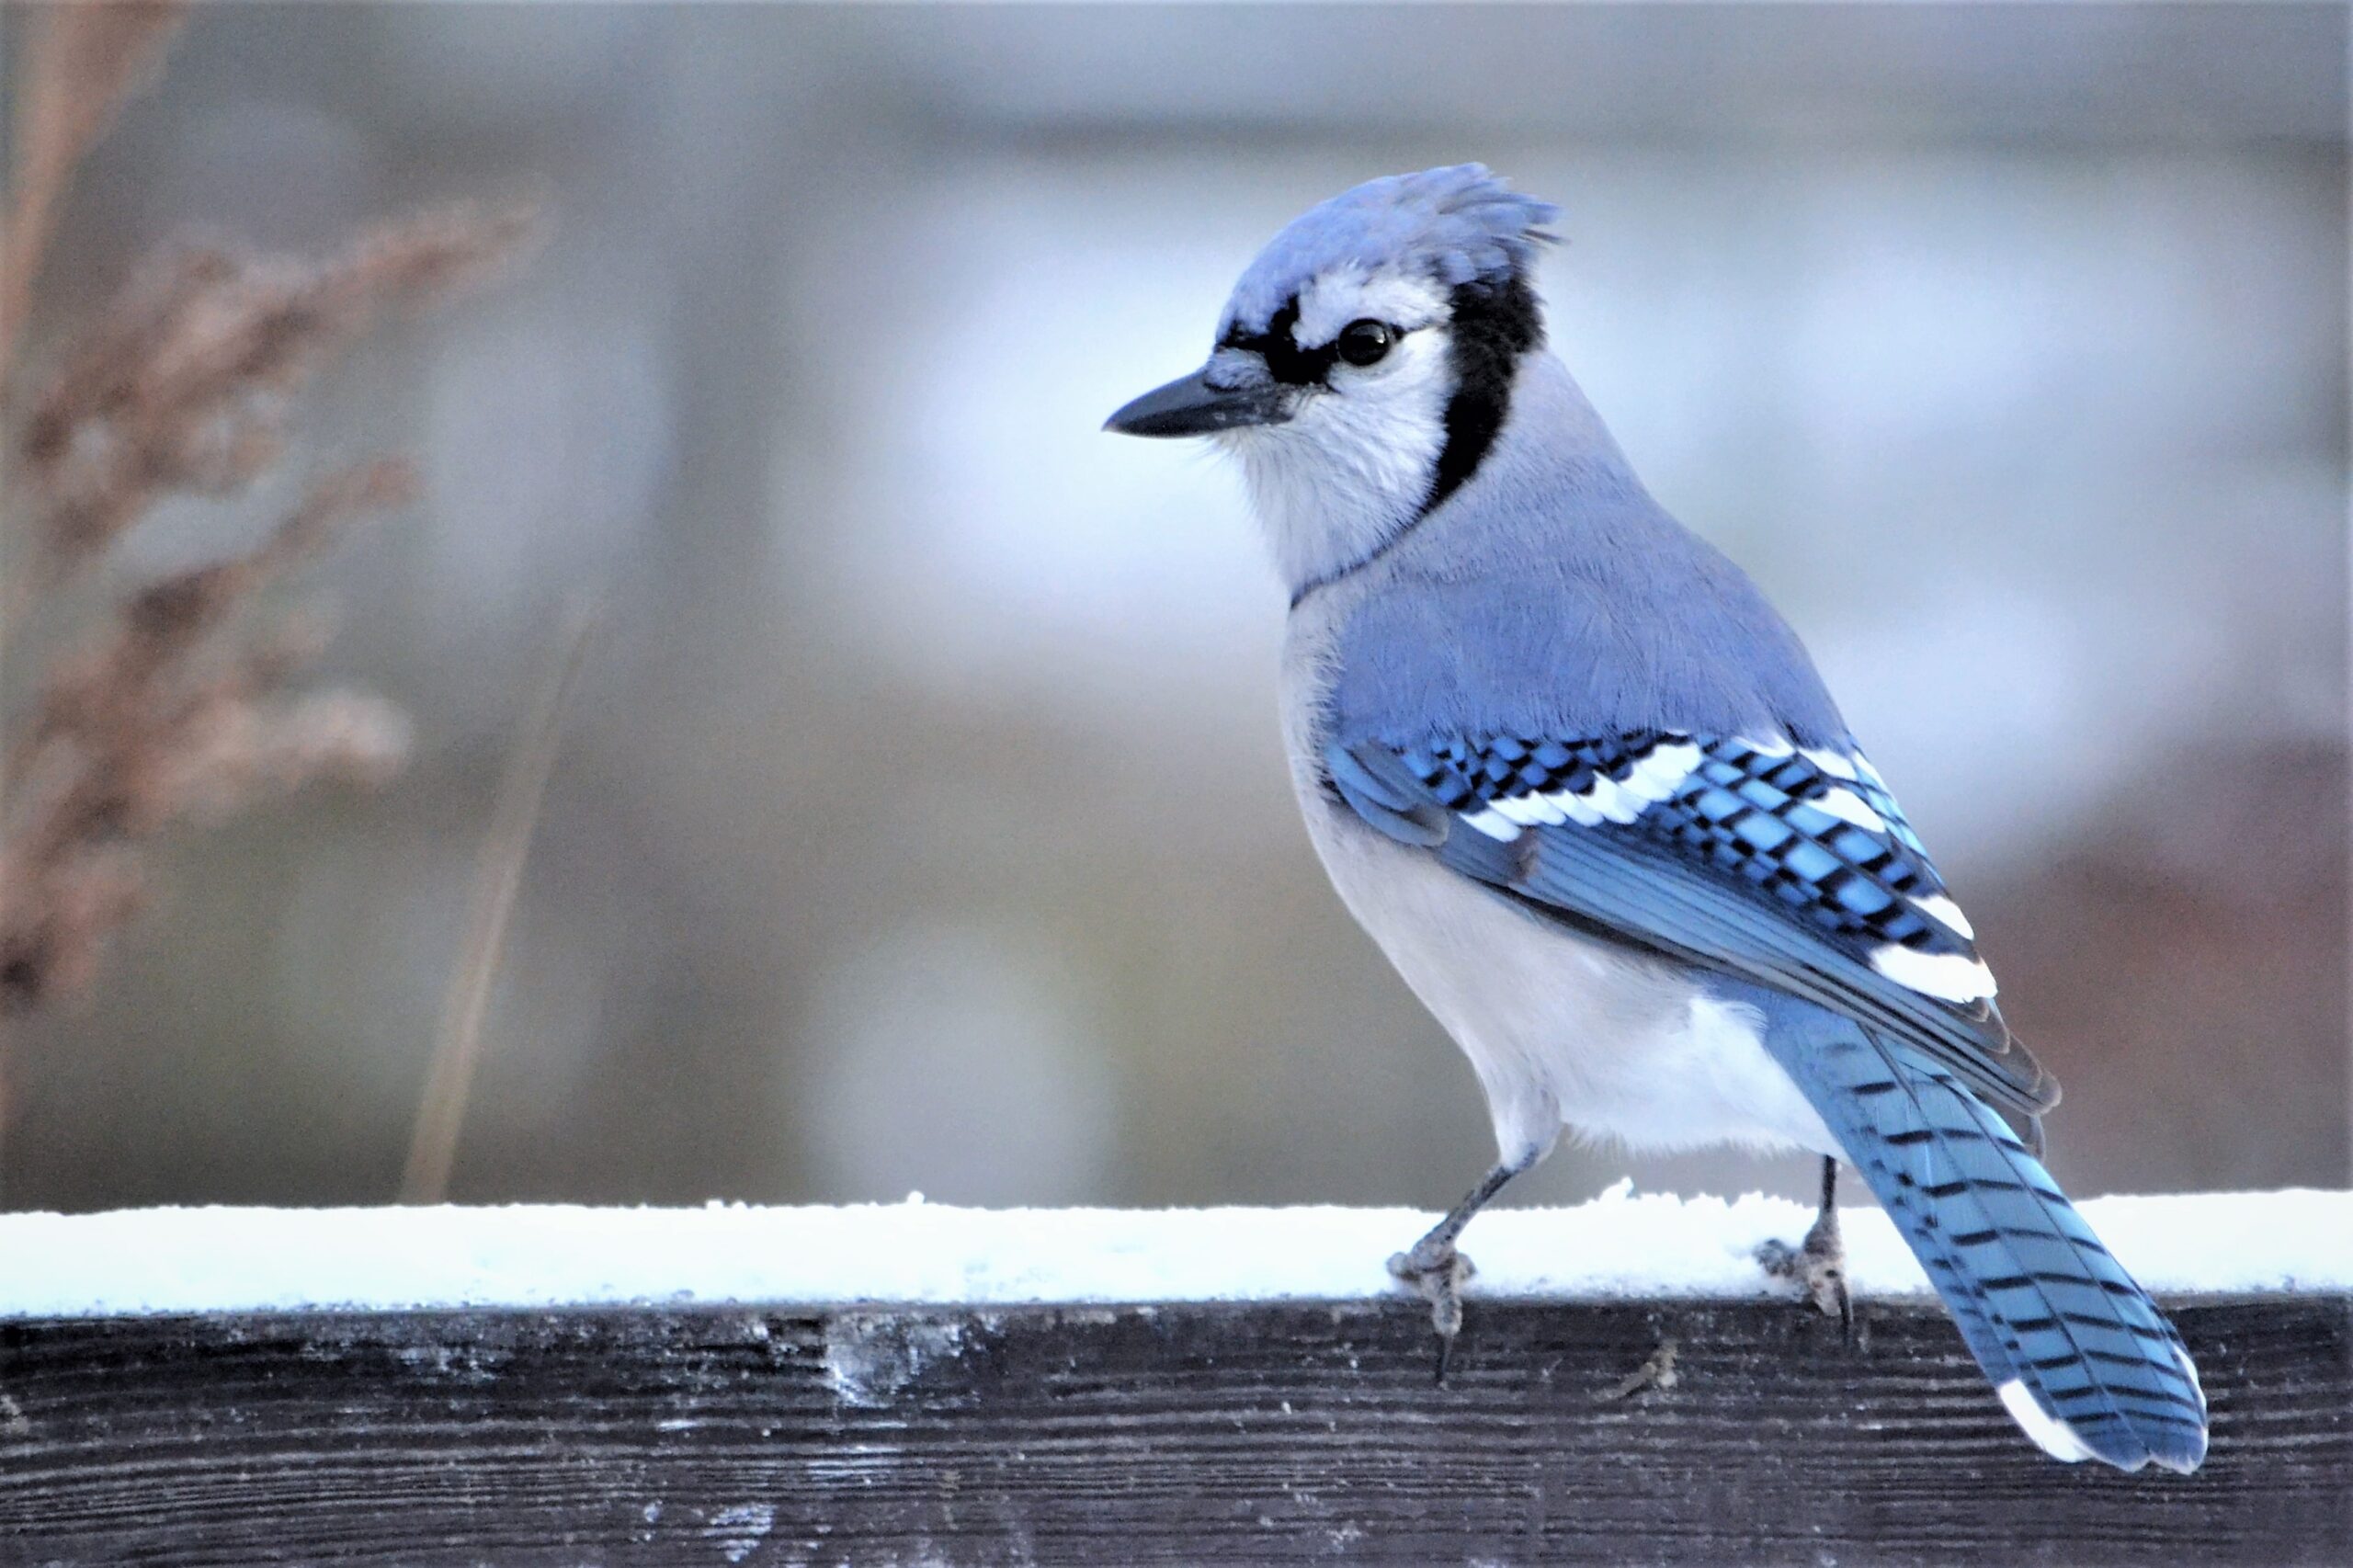 beautiful blue blue jay in nature 2021 10 22 14 39 34 utc scaled Don't be jealous, but this couple has a blue jay friend named Henry